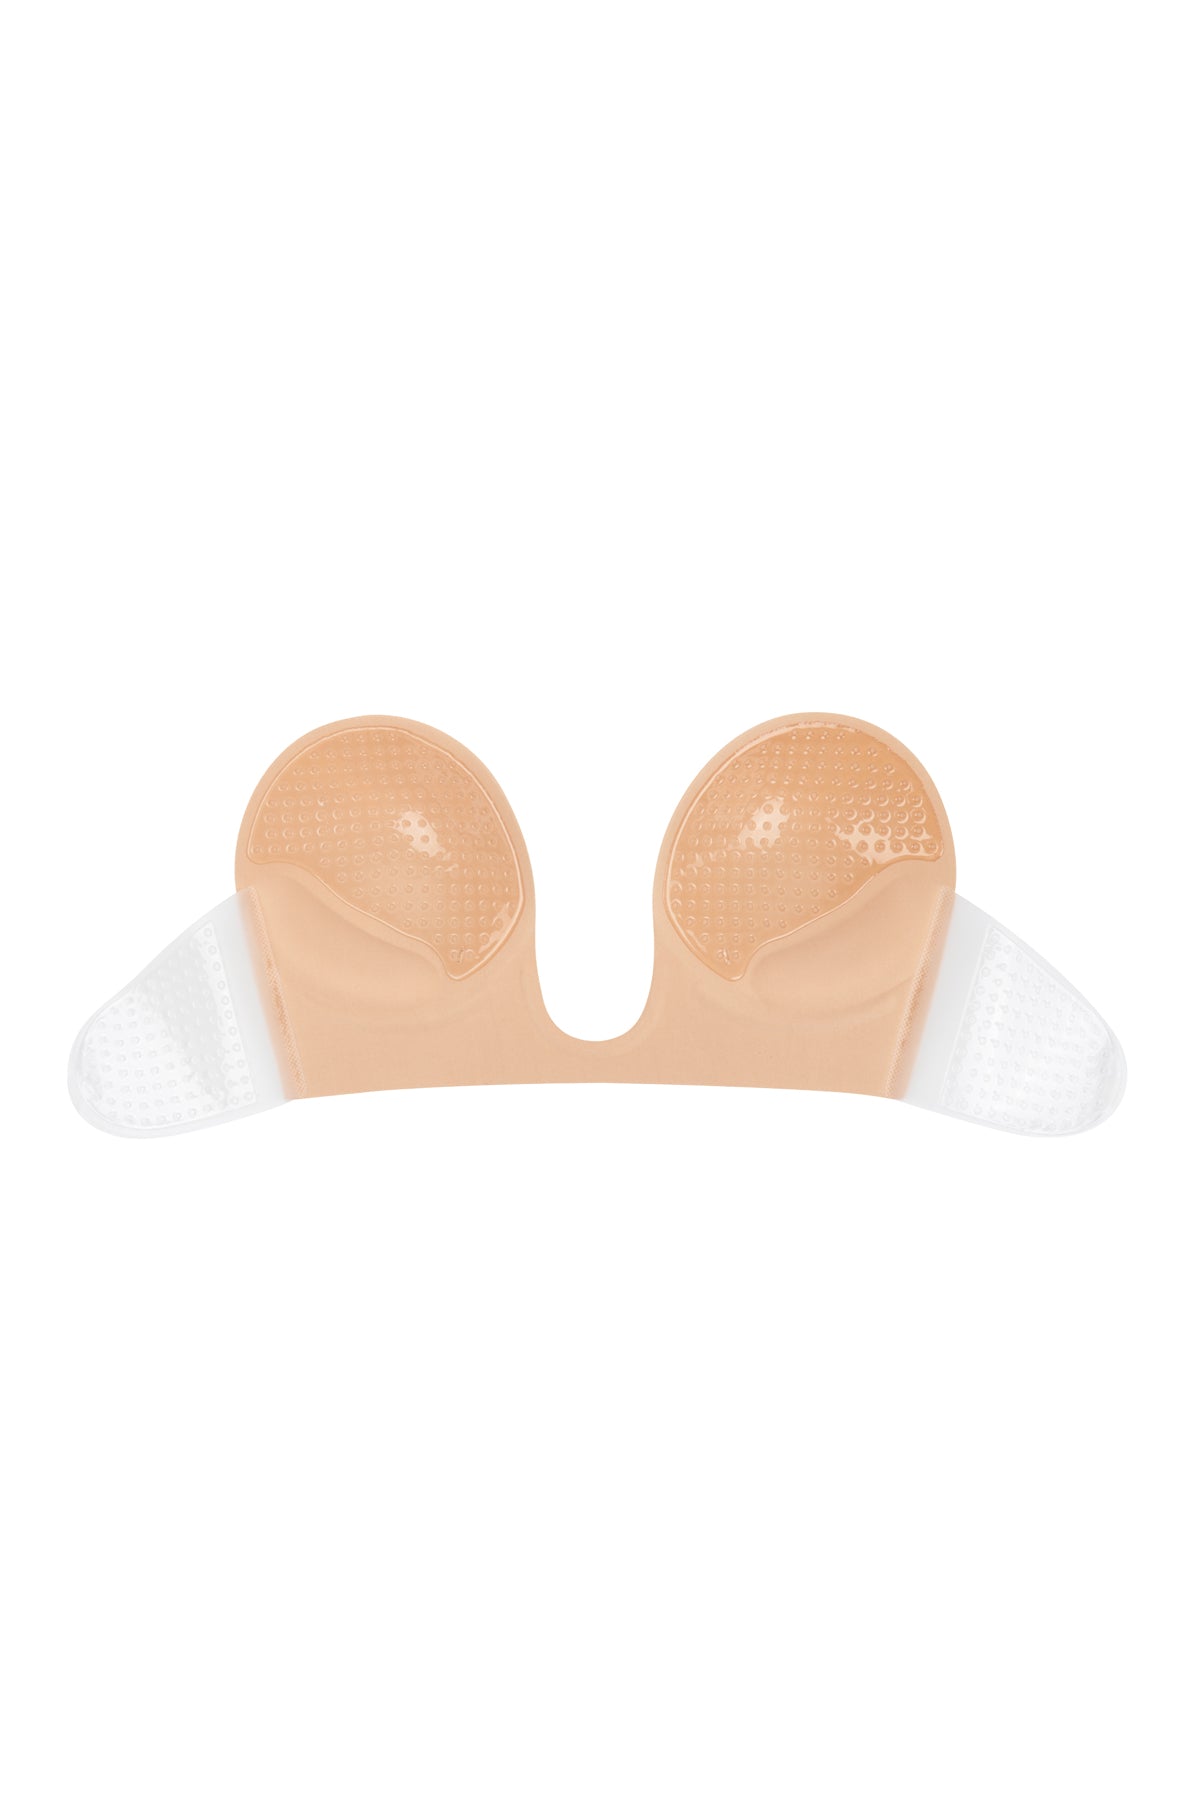 STRAPLESS PUSH UP ADHESIVE NU BRA WITH NIPPLE TAPE AND TRANSPARENT STRAP